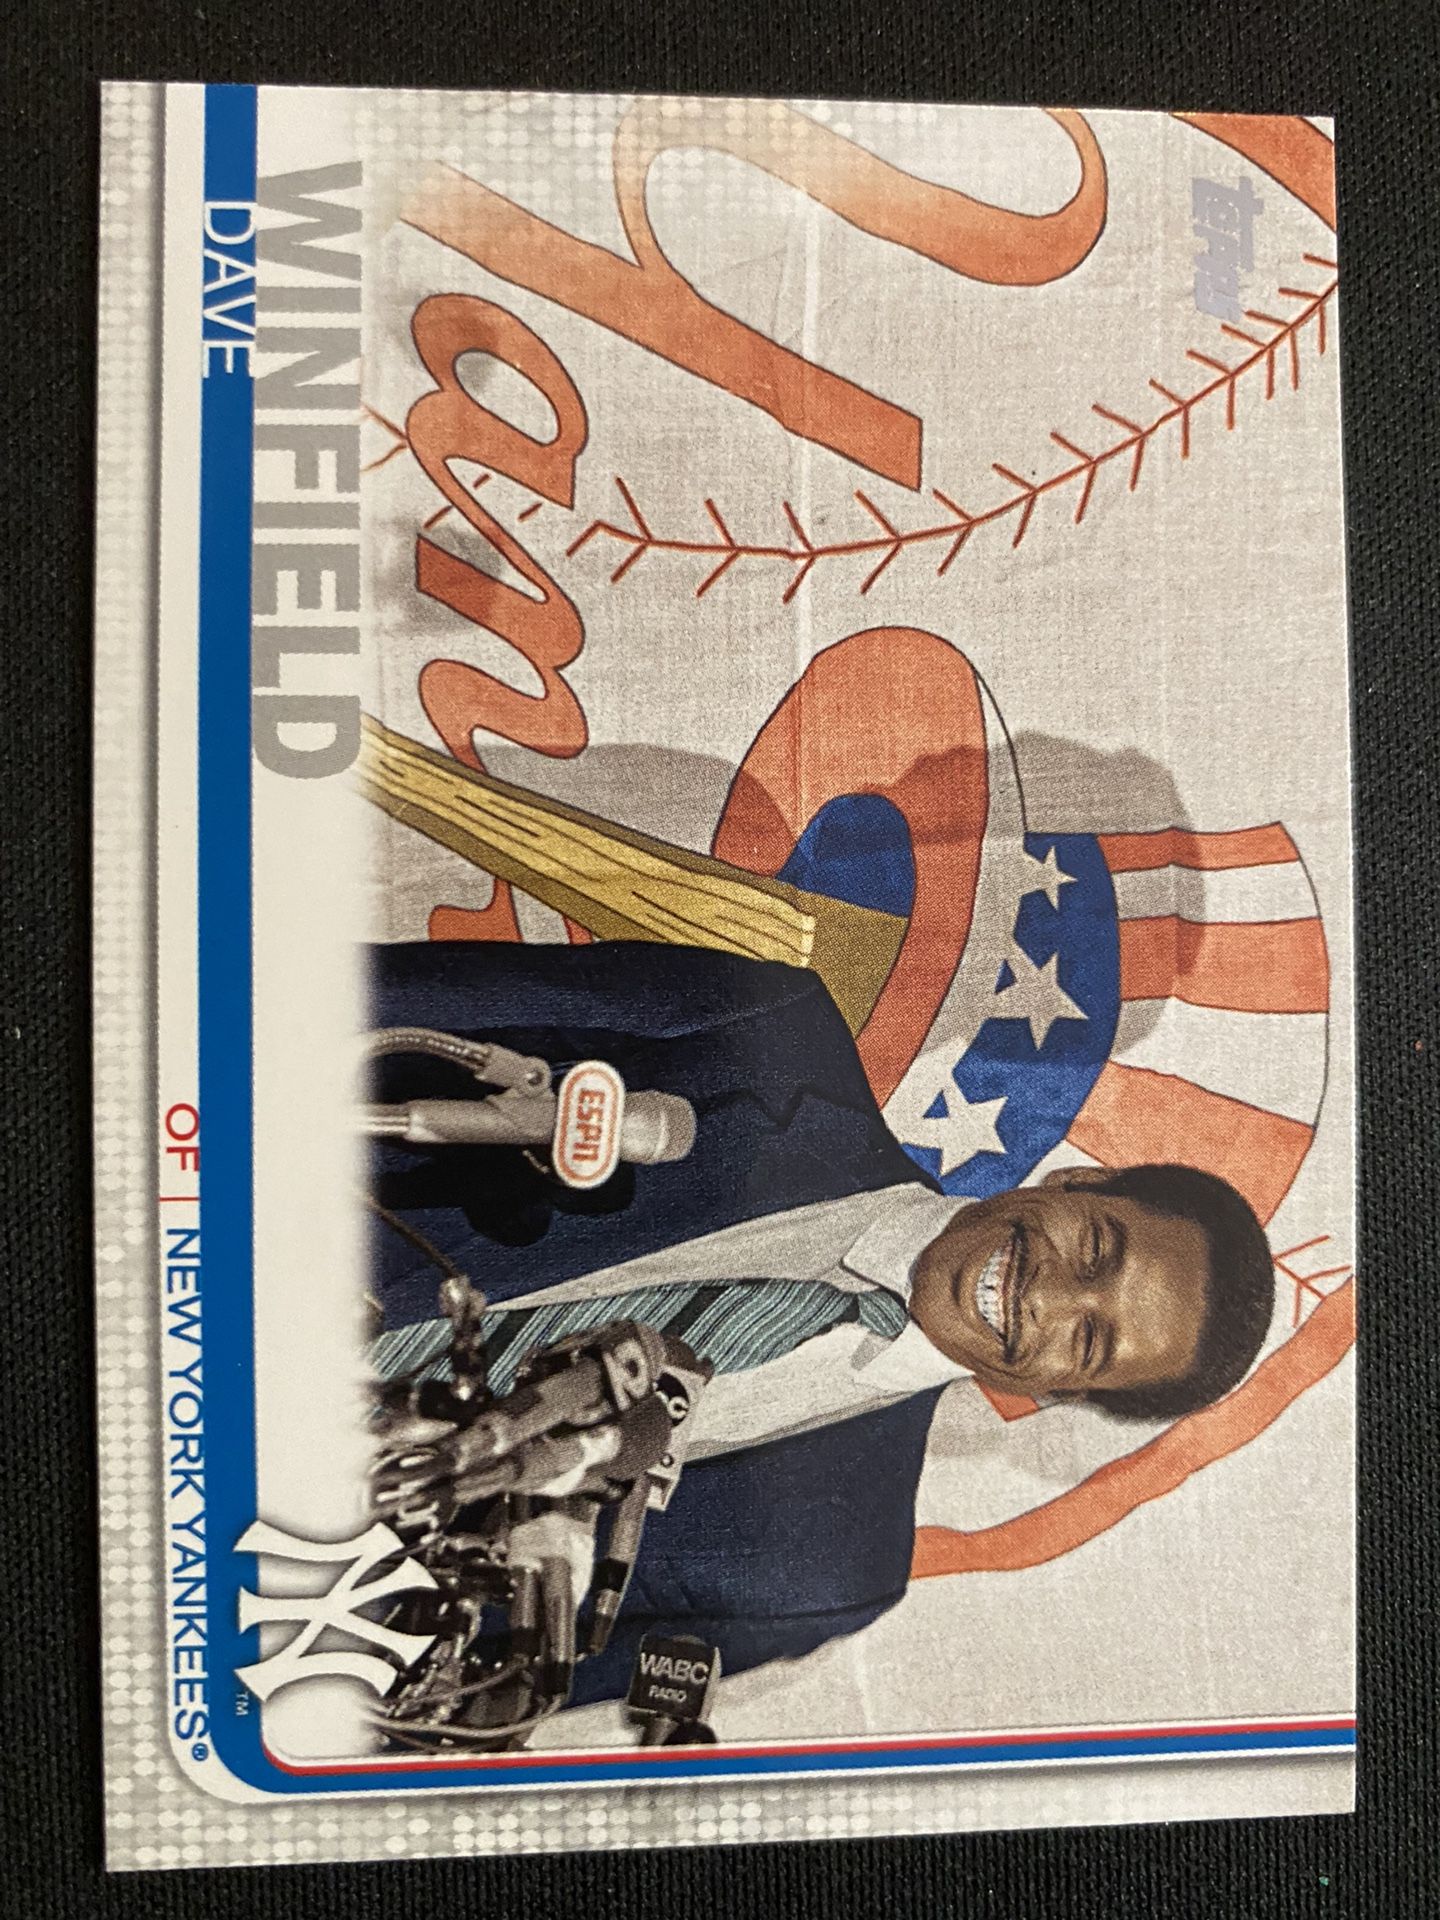 2019 Topps SP Greats Variation Dave Winfield #653.2 HOF